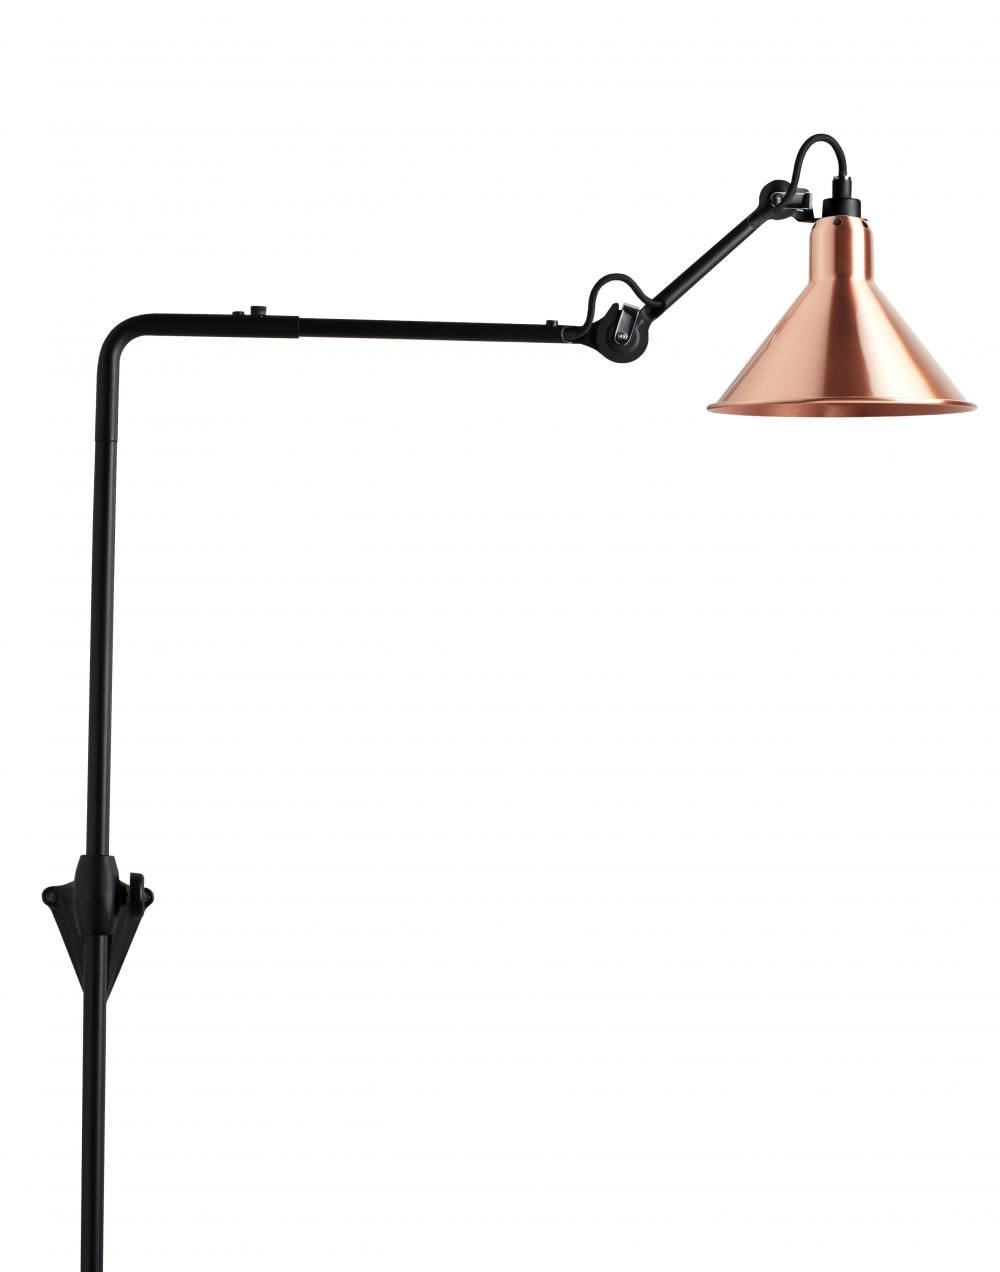 Lampe Gras 216 Wall Light Copper Shade With White Interior Conic Shade